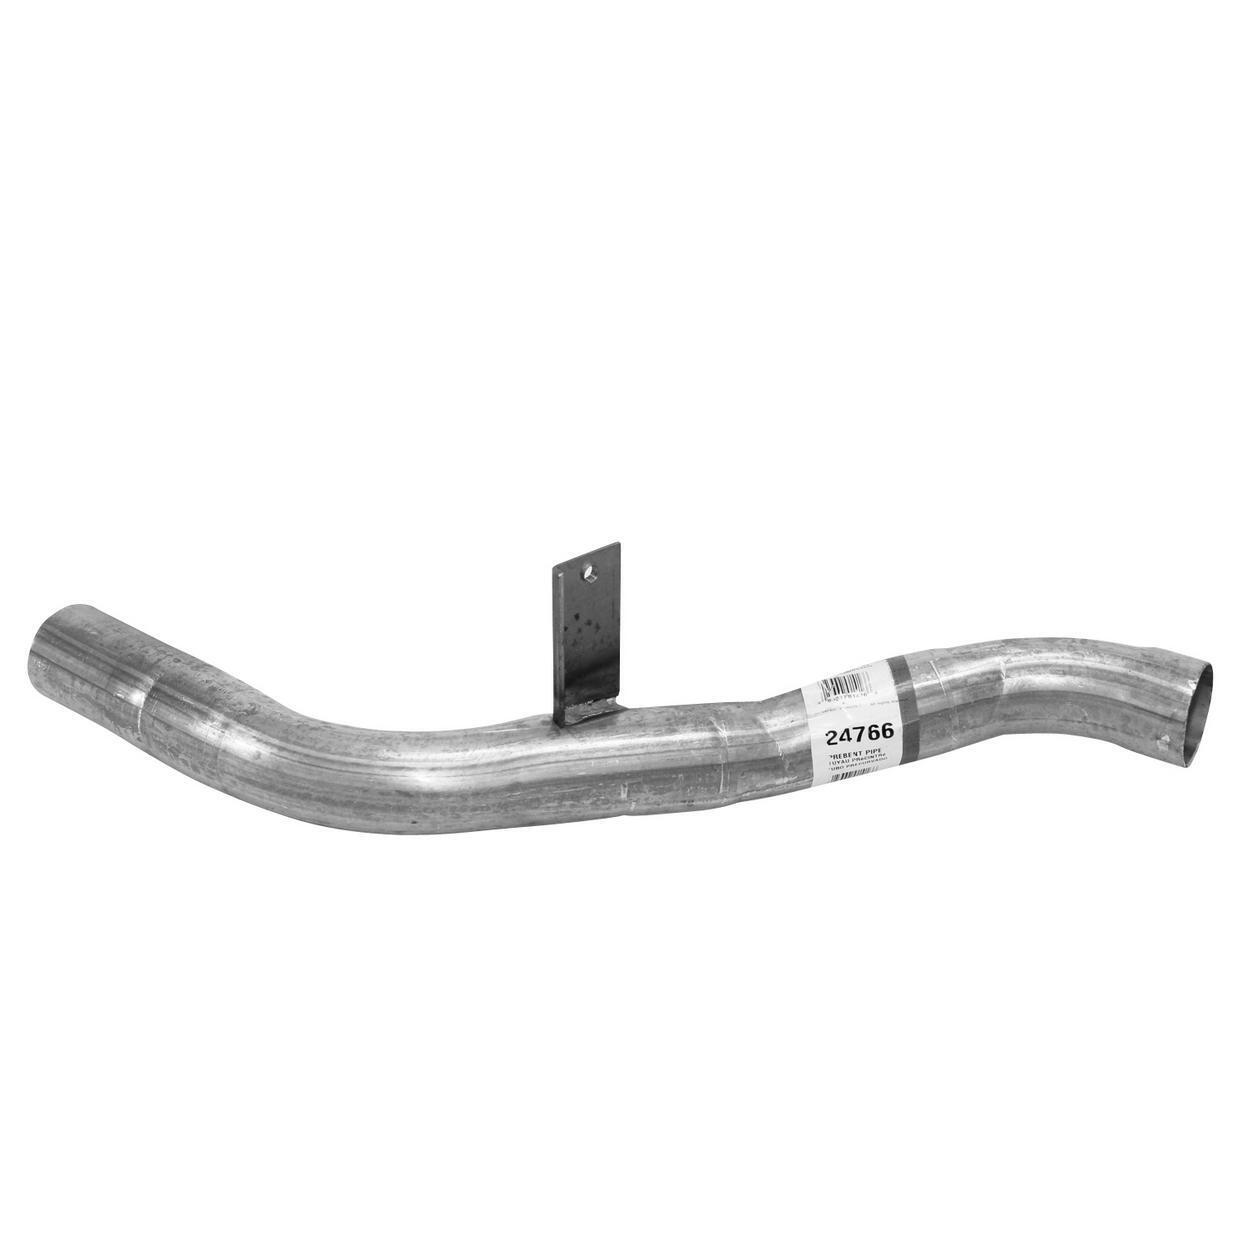 Exhaust Tail Pipe for 1993 Oldsmobile Cutlass Ciera 2.2L L4 GAS OHV